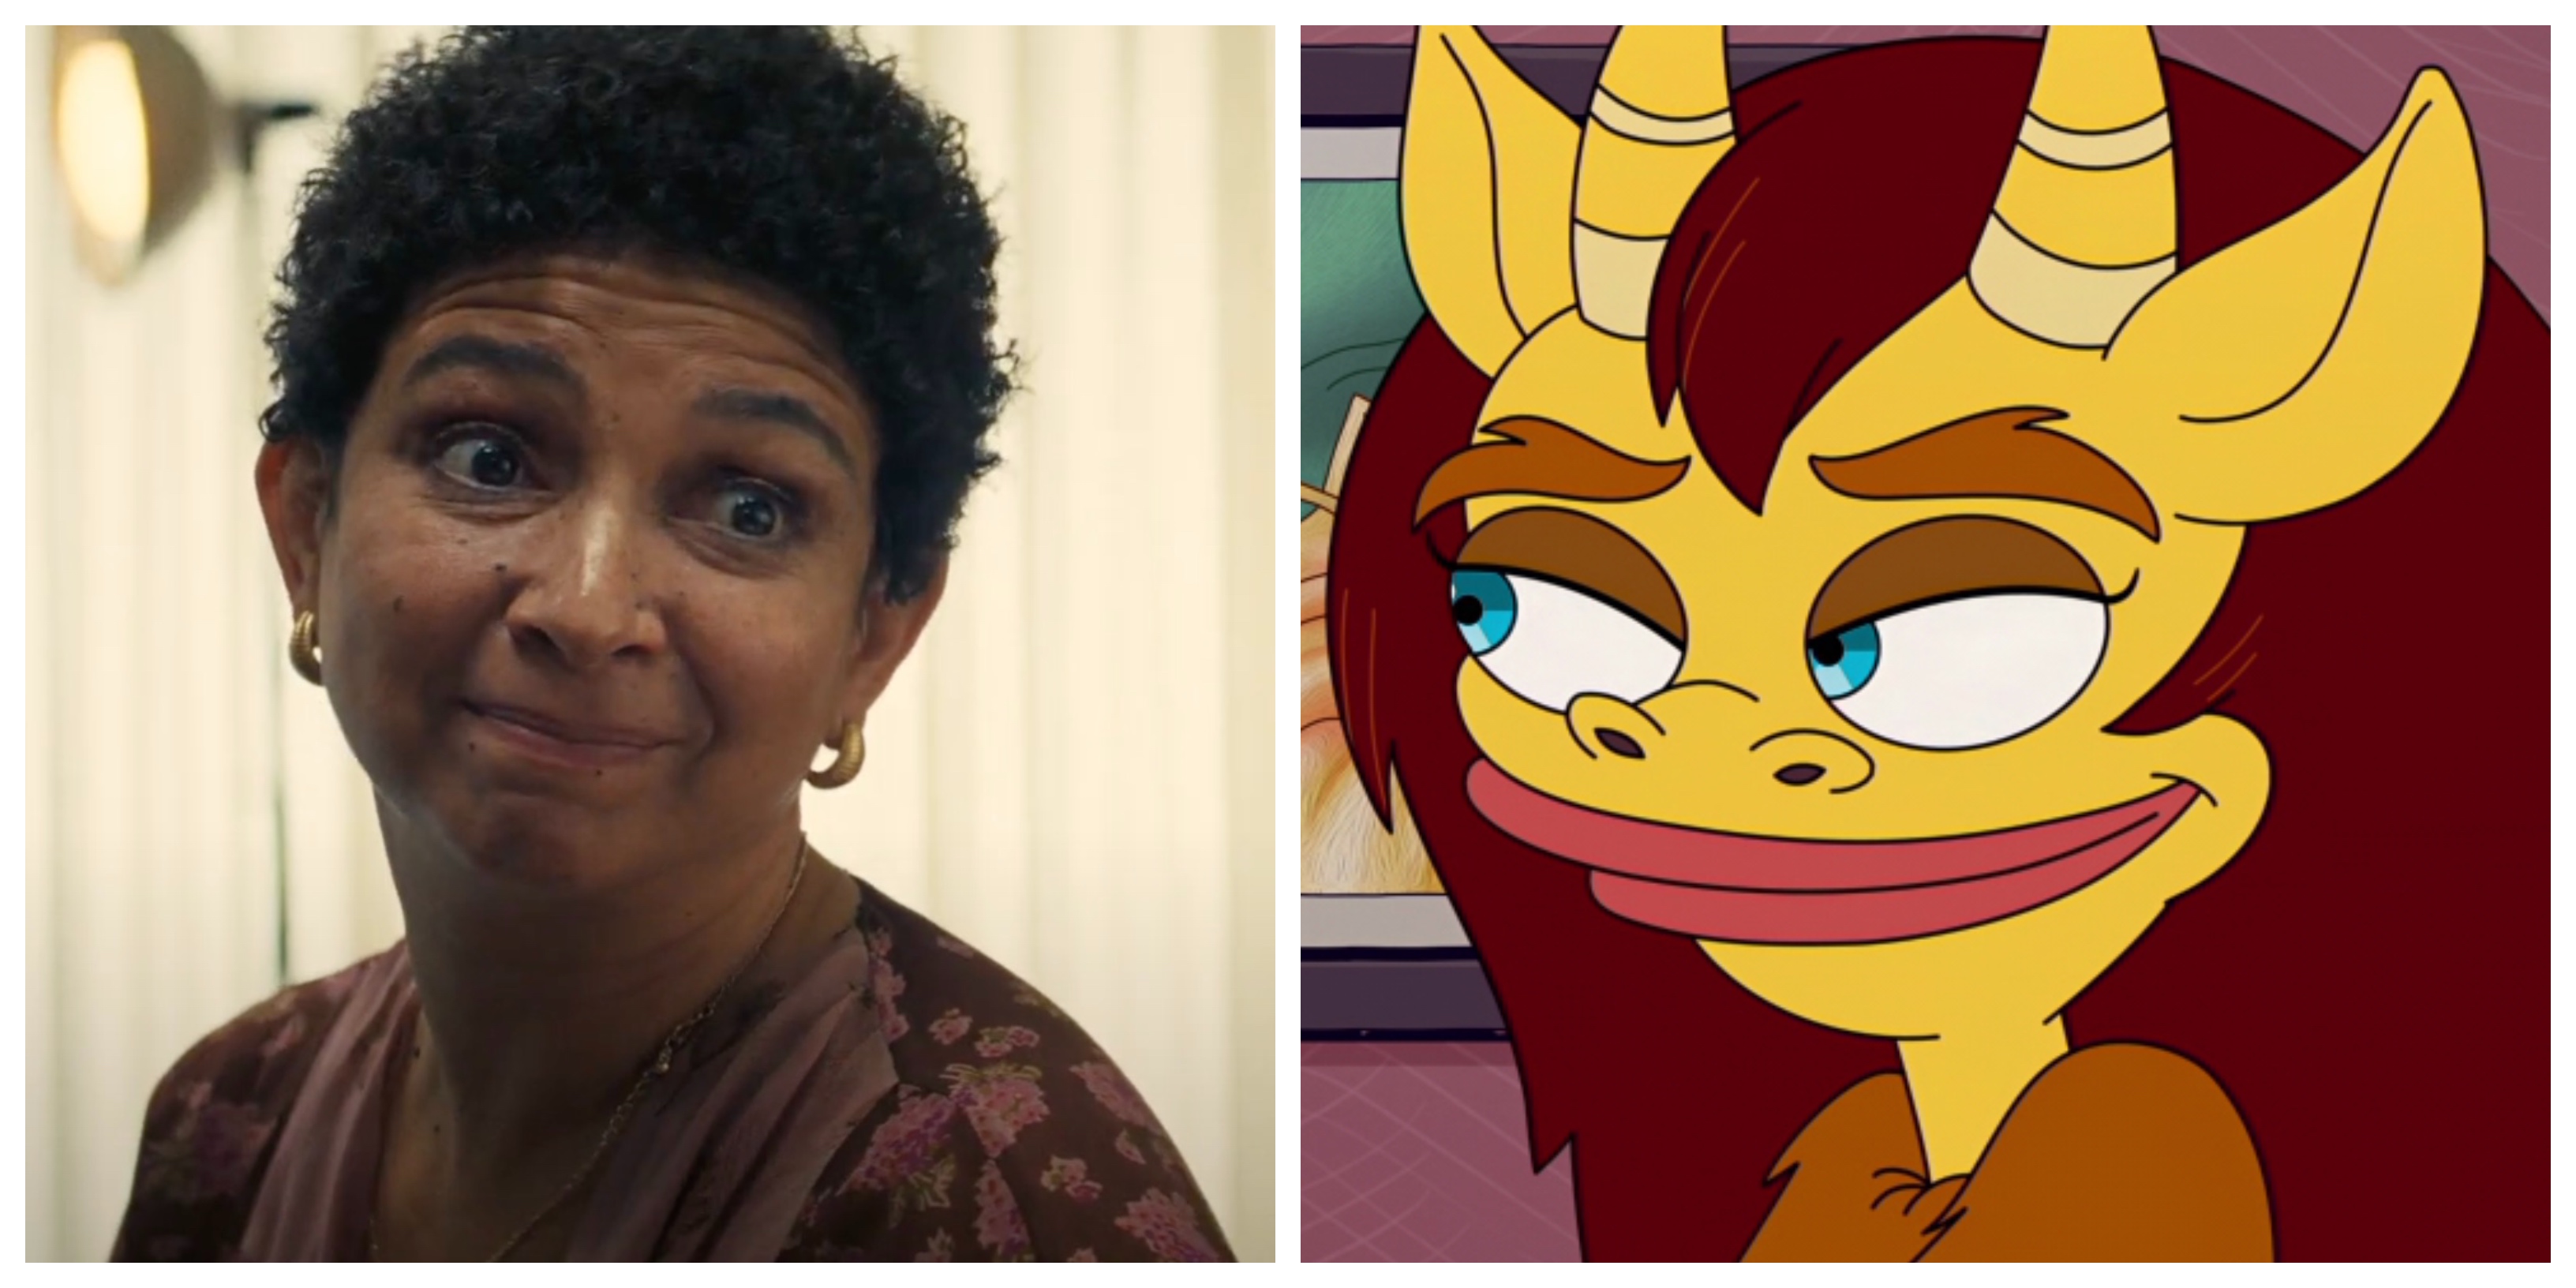 Human Resources Voice Cast - Maya Rudolph as Connie the Hormone Monstress